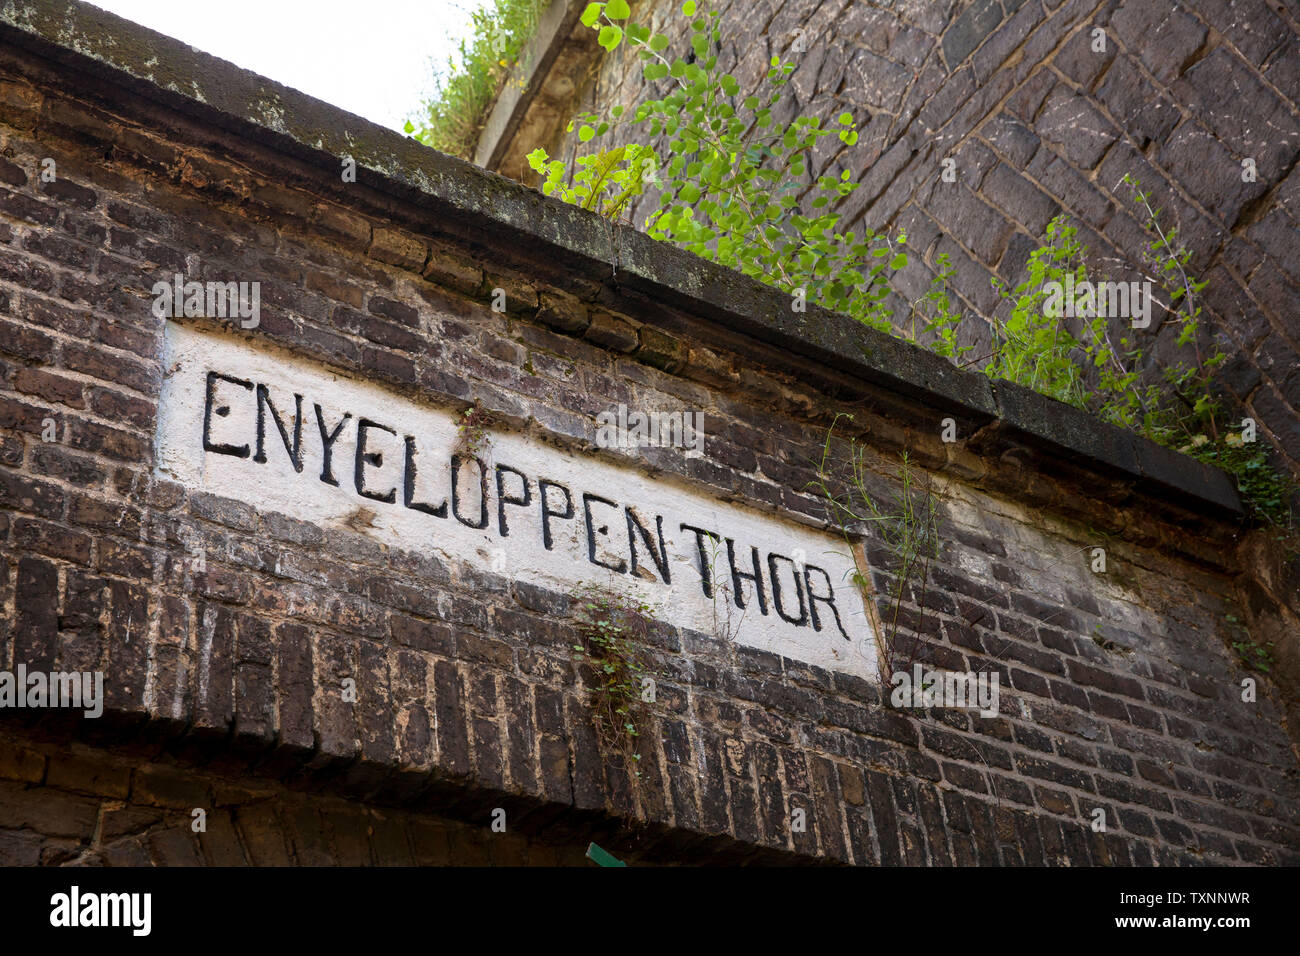 Enveloppen Thor, a gate of the Fort X, a part of the former inner fortress ring, Cologne, Germany.   Enveloppen Thor des Fort X, Teil des ehemaligen i Stock Photo